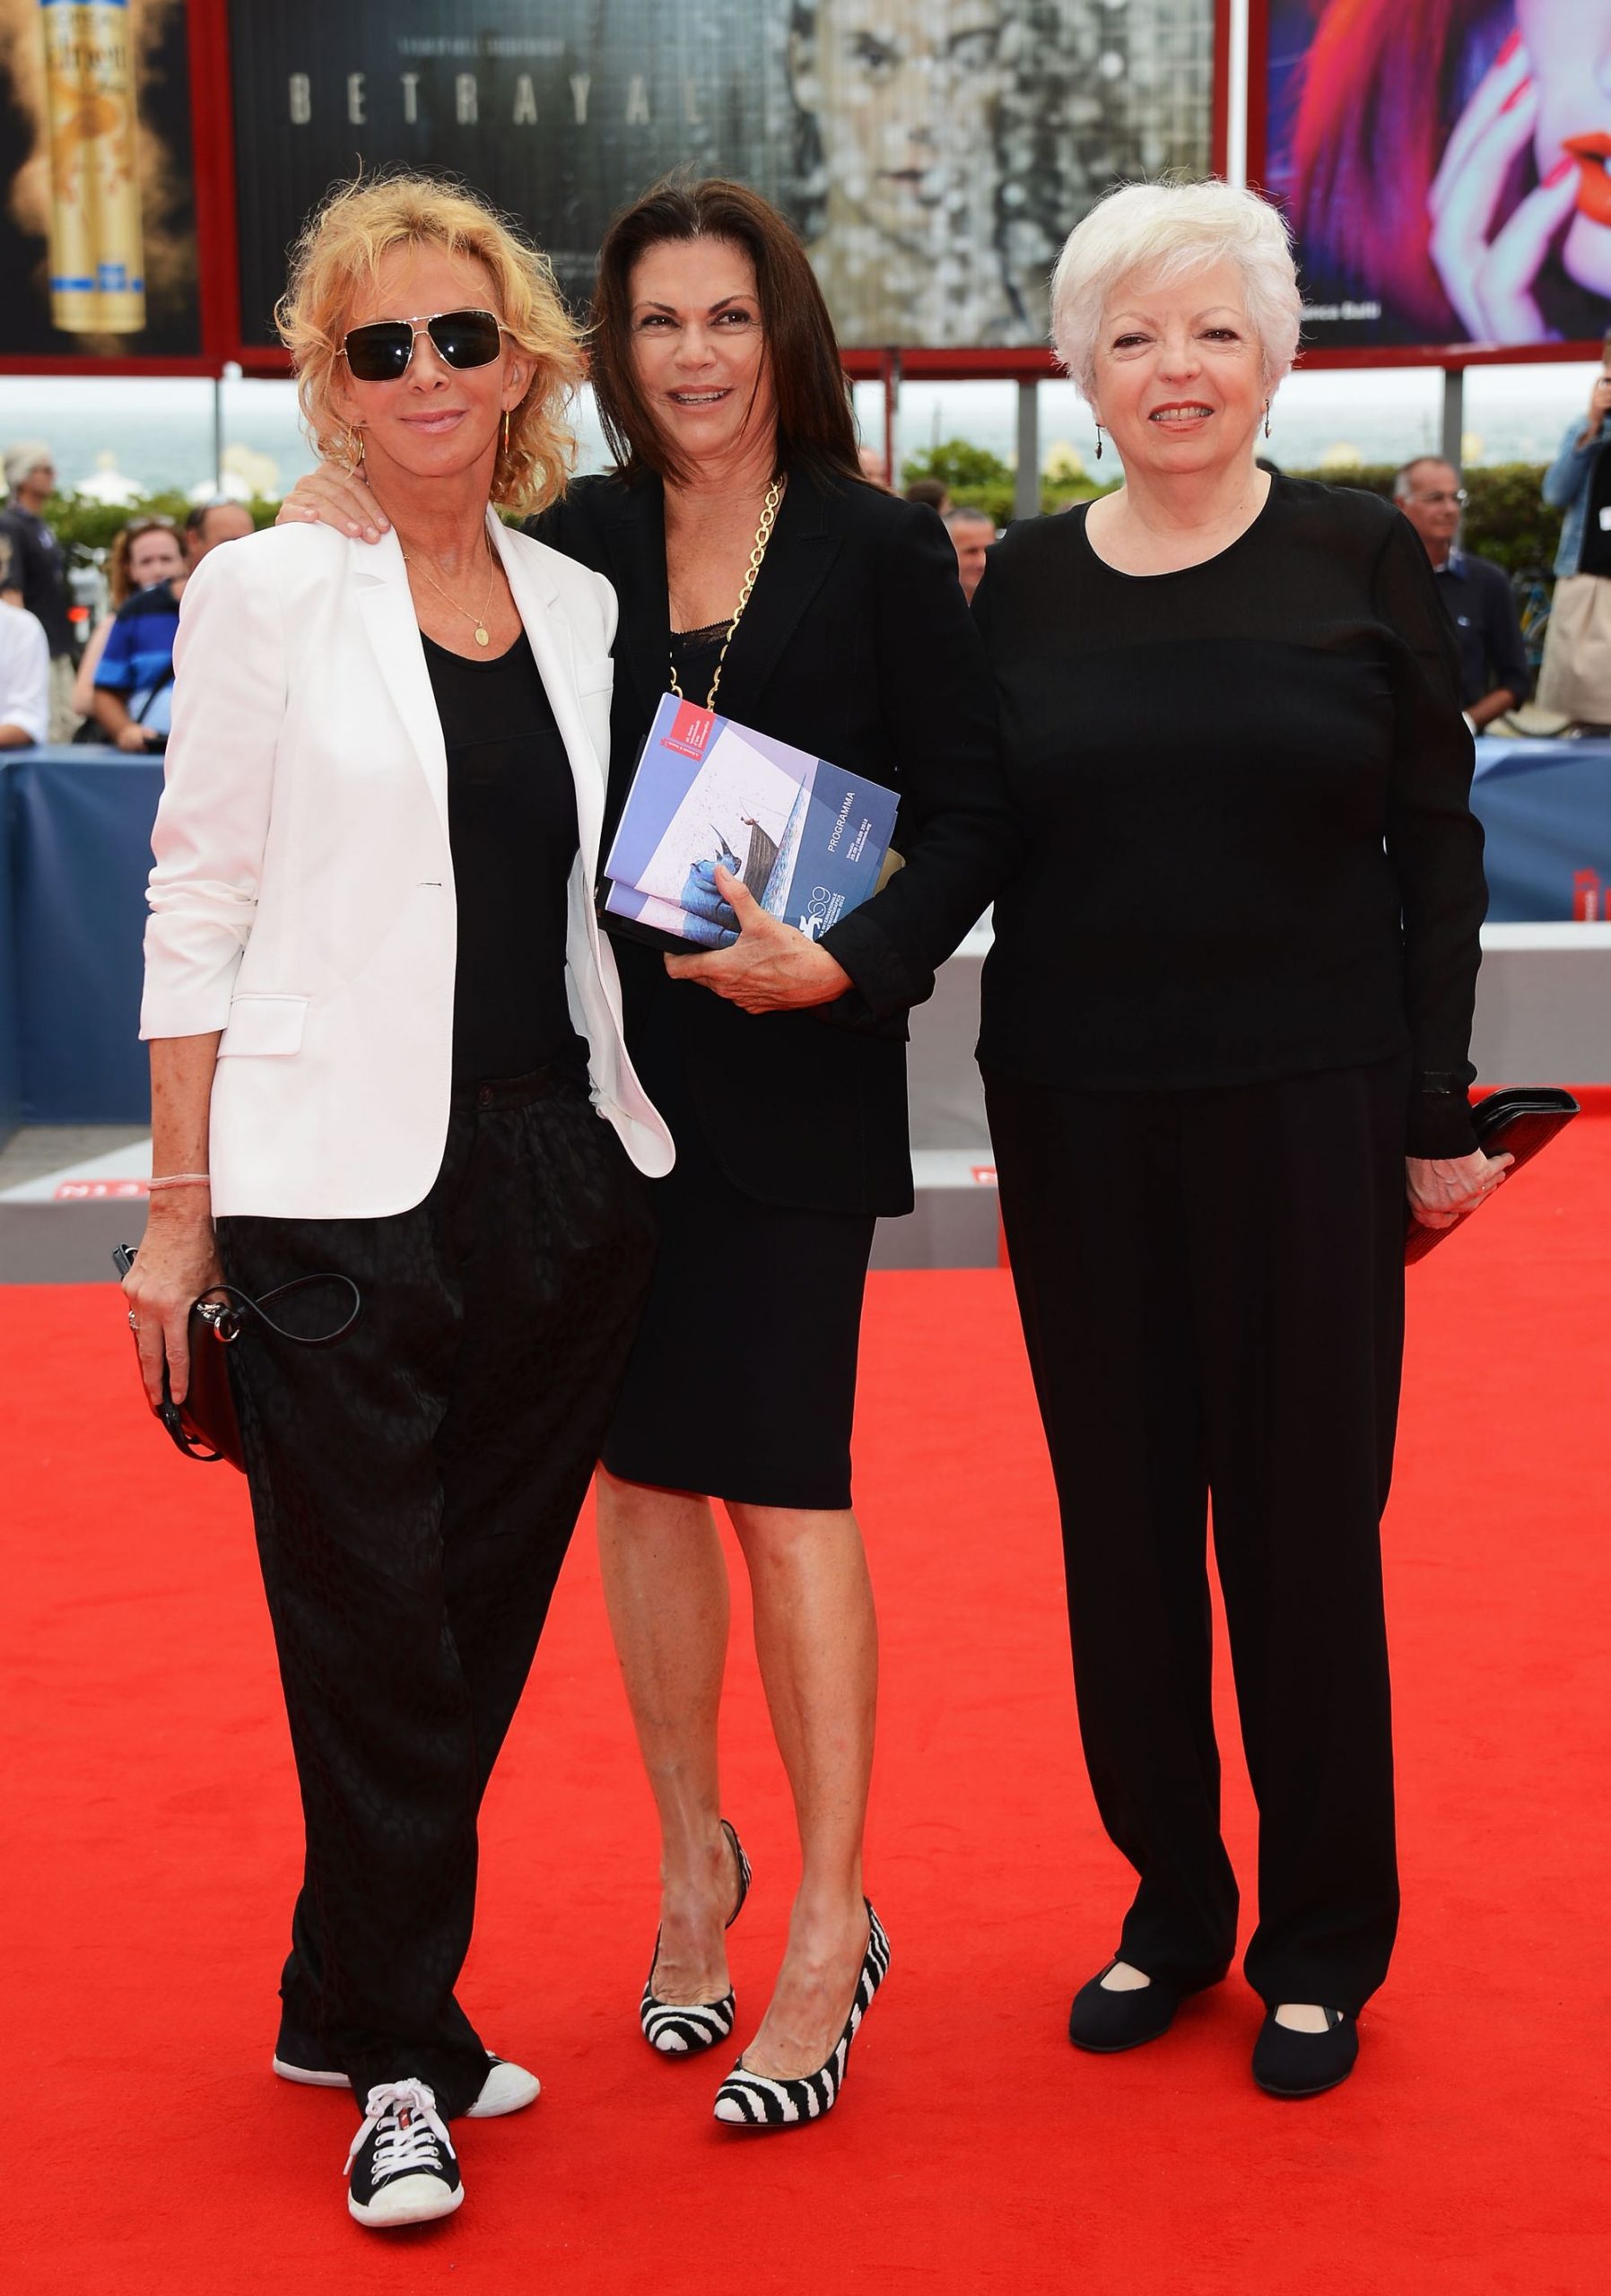 Trudie Styler, Colleen Atwood, Thelma Schoonmaker at the world restoration premiere of "Il caso Mattei/The Mattei Affair" at the 69th Venice International Film Festival (Photo courtesy | Gucci/Getty Images)